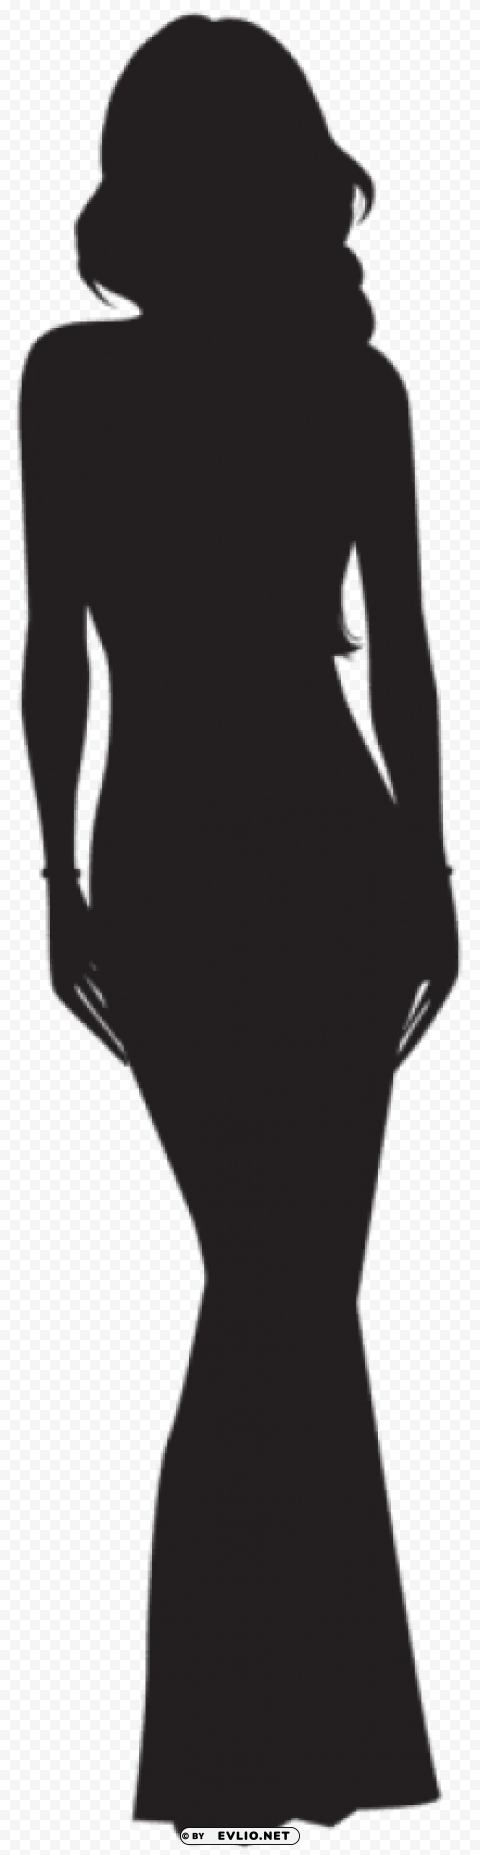 woman silhouette High-resolution transparent PNG images comprehensive assortment